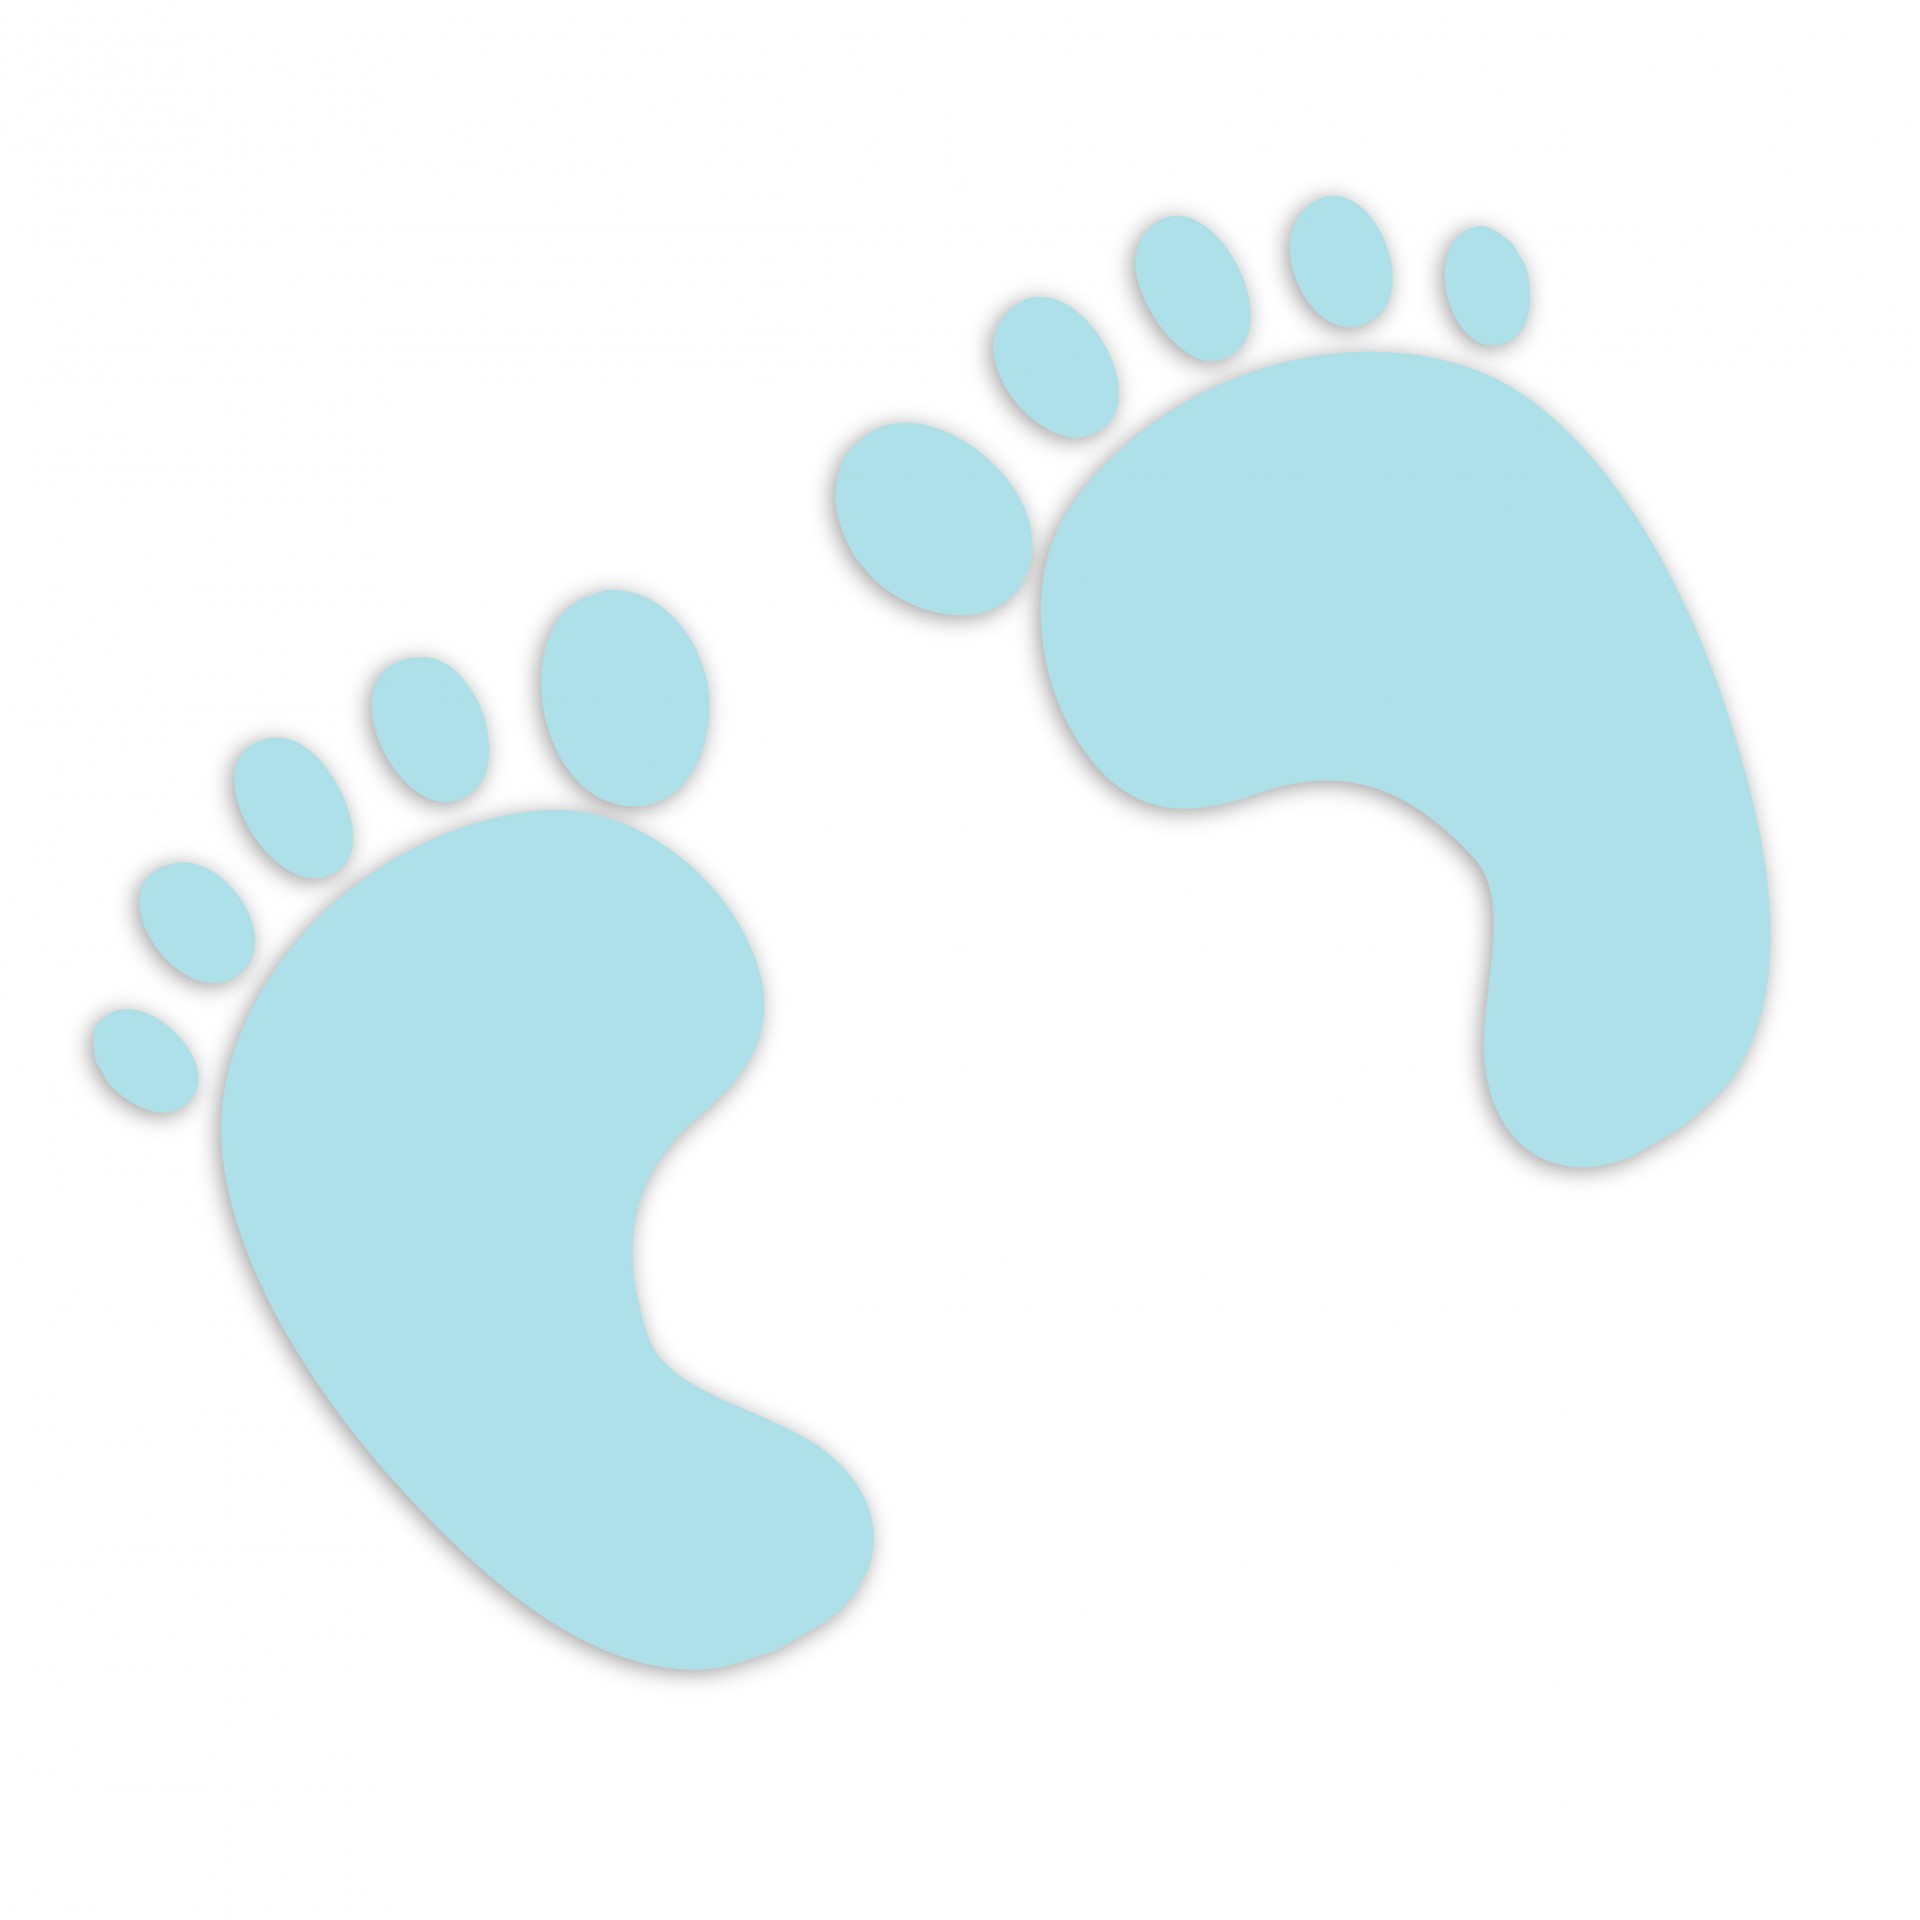 Free clip art baby feet borders clipart images